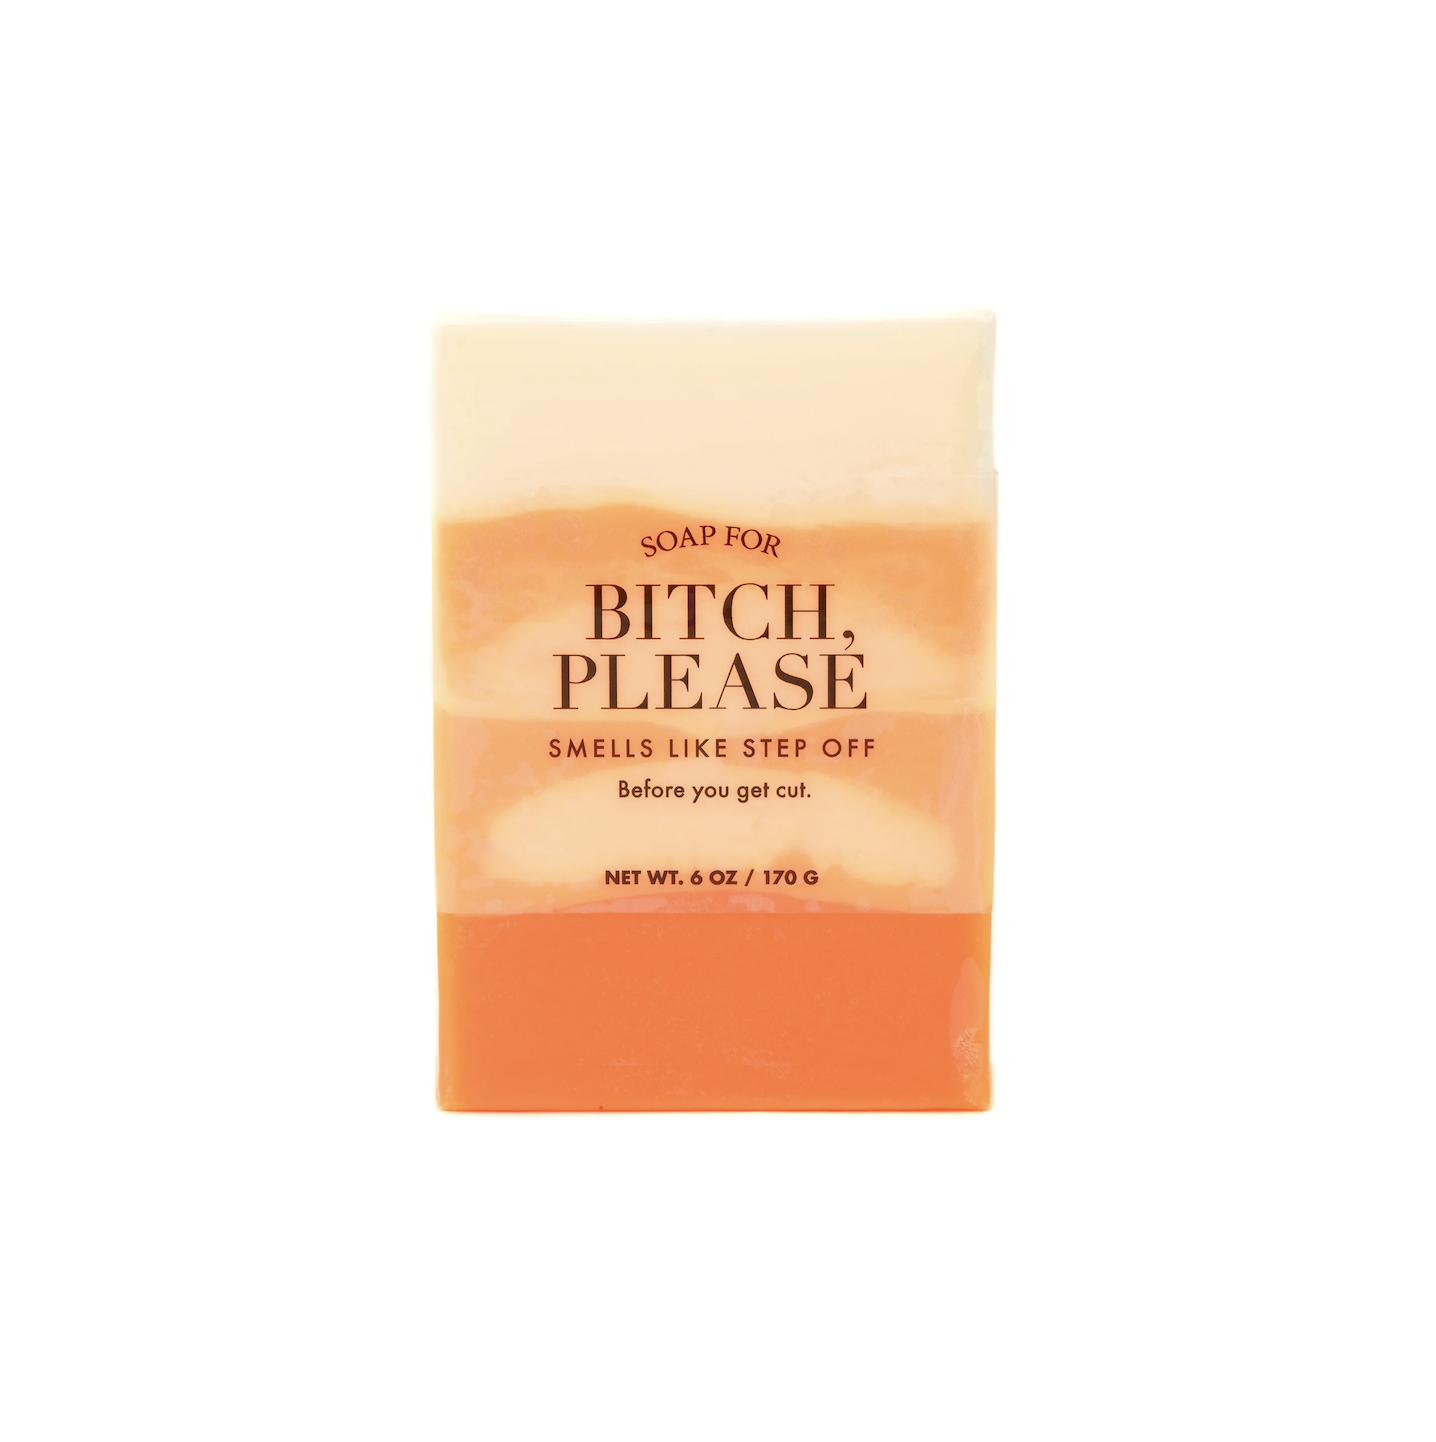 A Soap for Bitch, Please